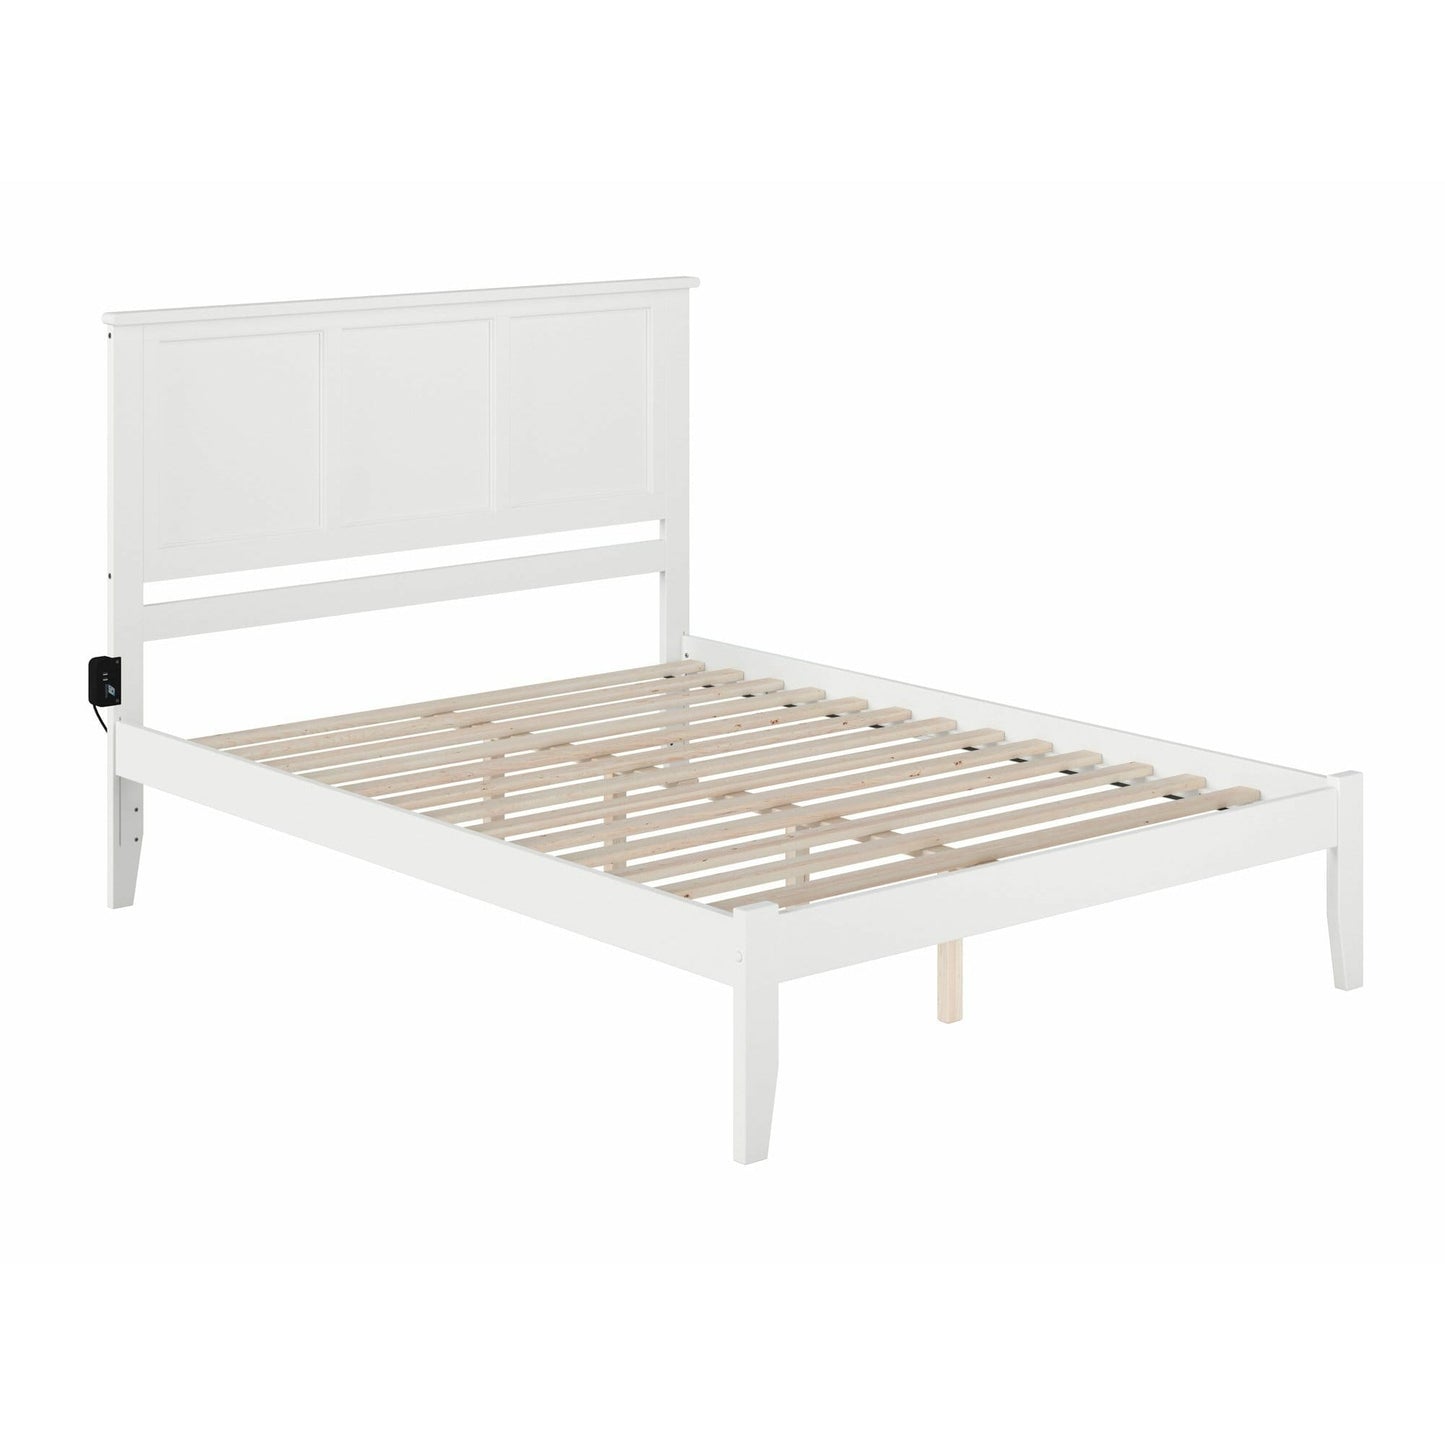 Atlantic Furniture Bed Madison Queen Platform Bed with Open Foot Board in Espresso